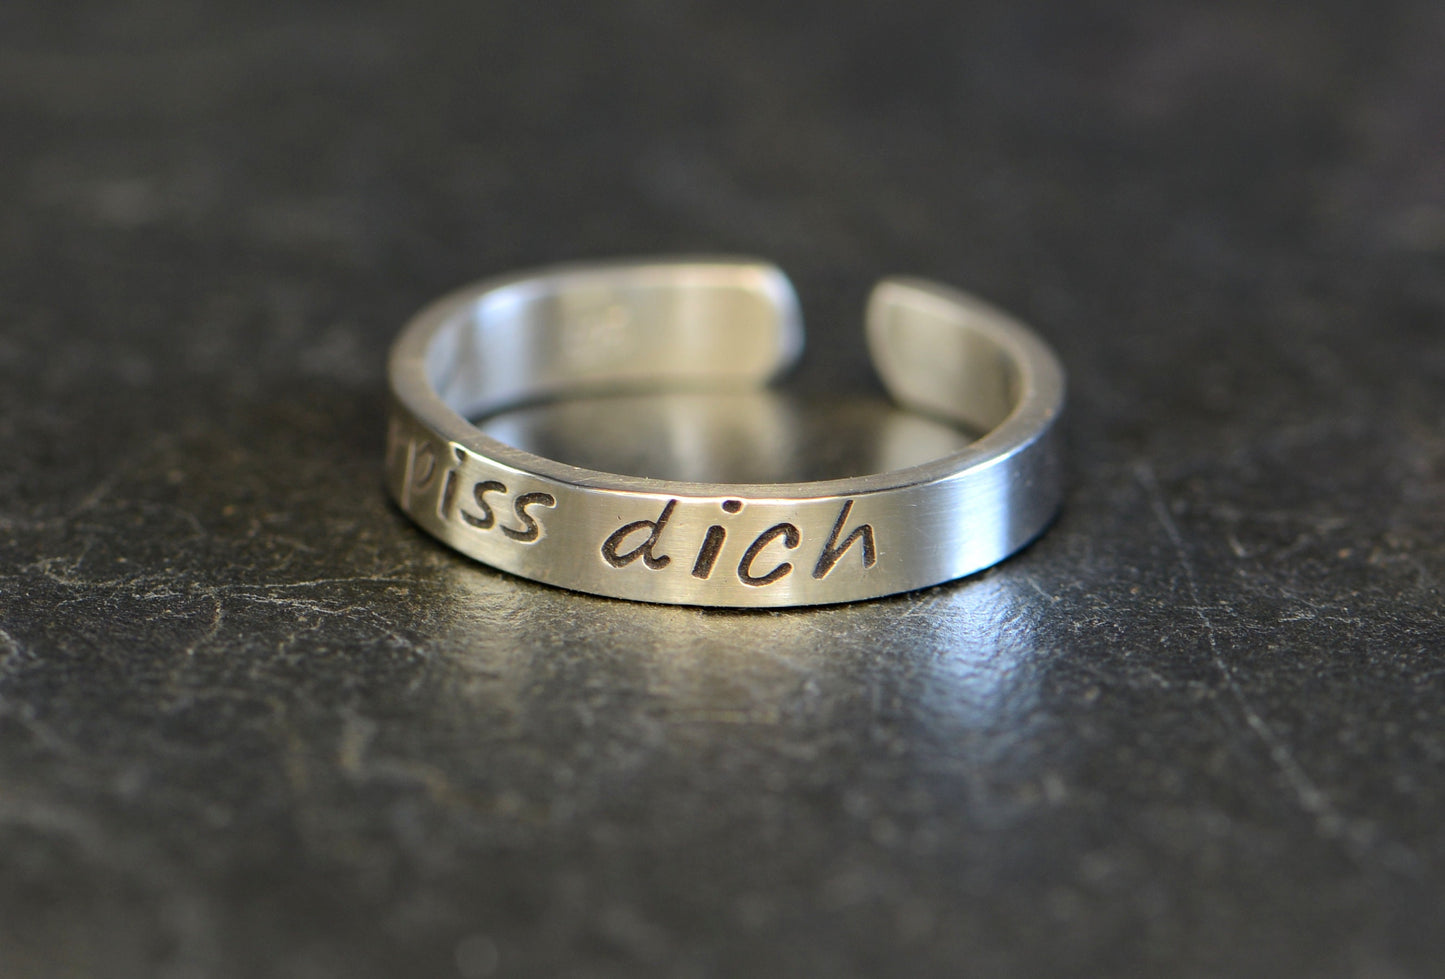 Verpiss Dich Toe Ring in Sterling Silver – Go “Piss Off" German Ring